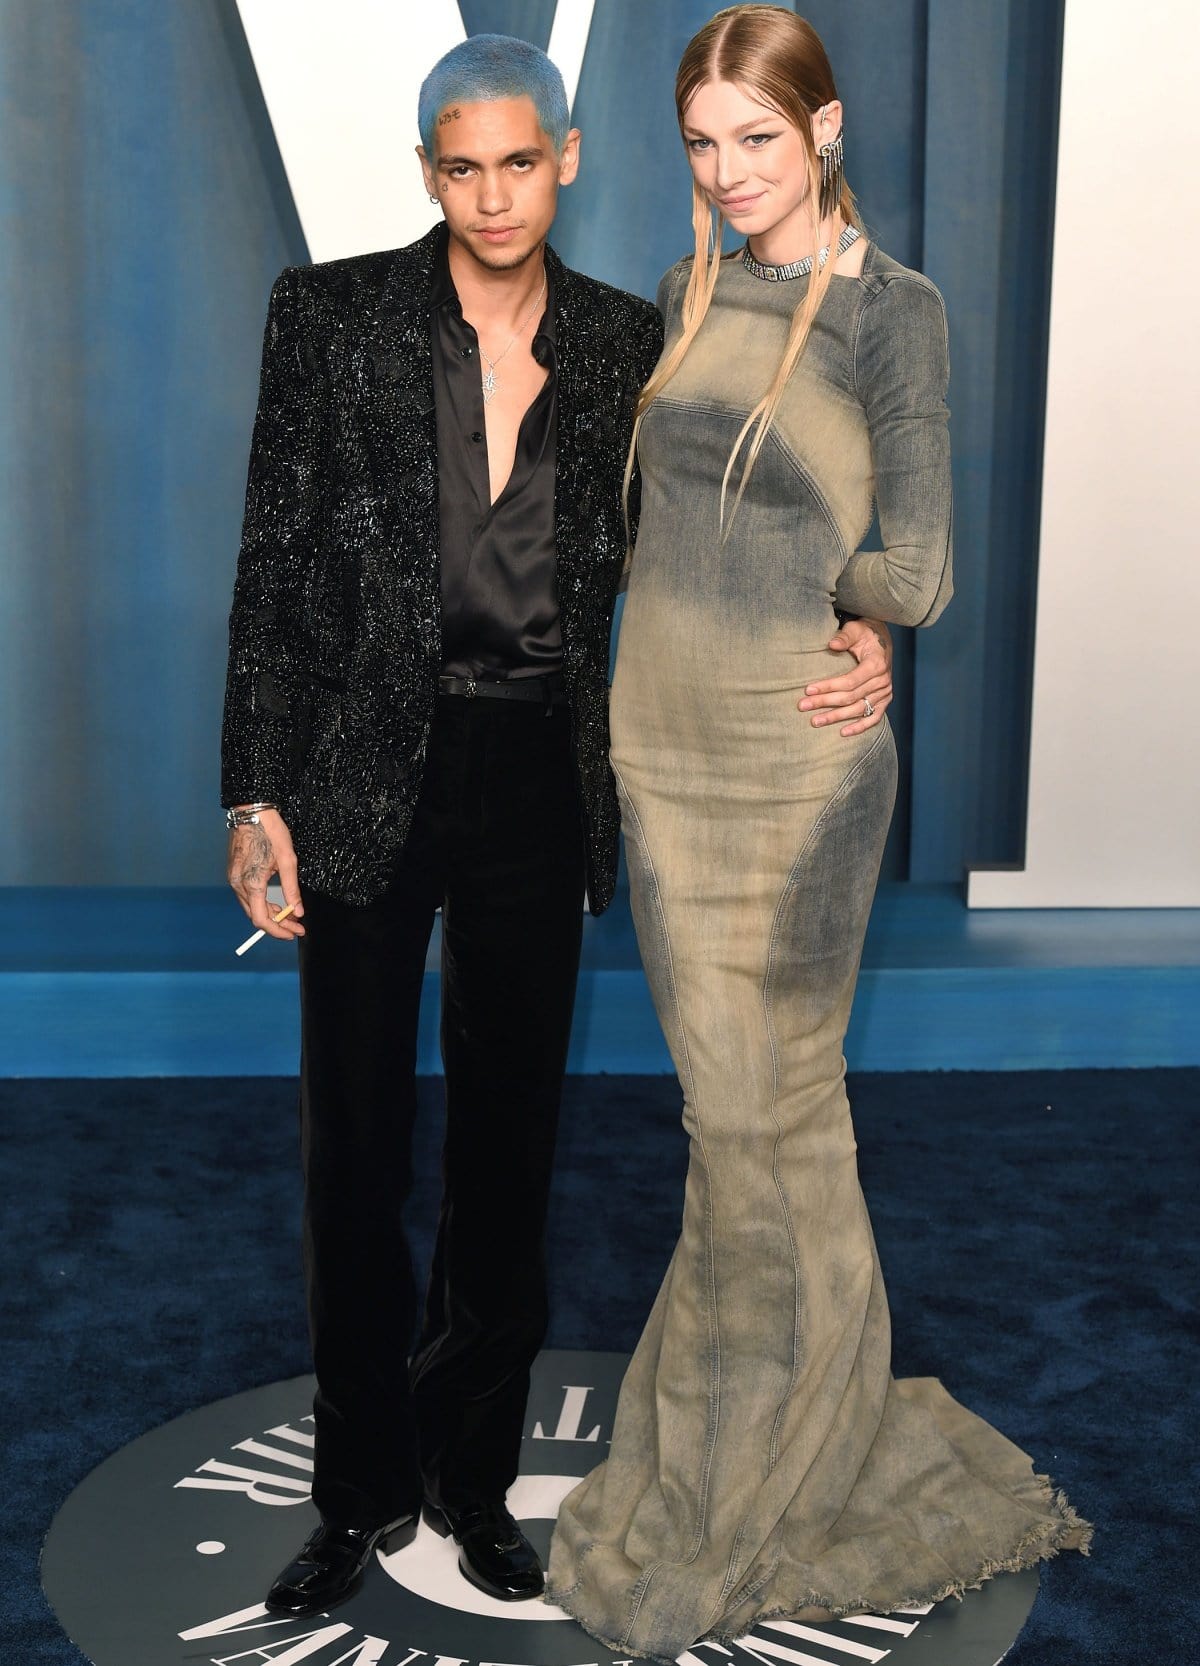 Dominic Fike and Hunter Schafer making their blue-carpet debut as a couple at the 2022 Vanity Fair Oscar Party